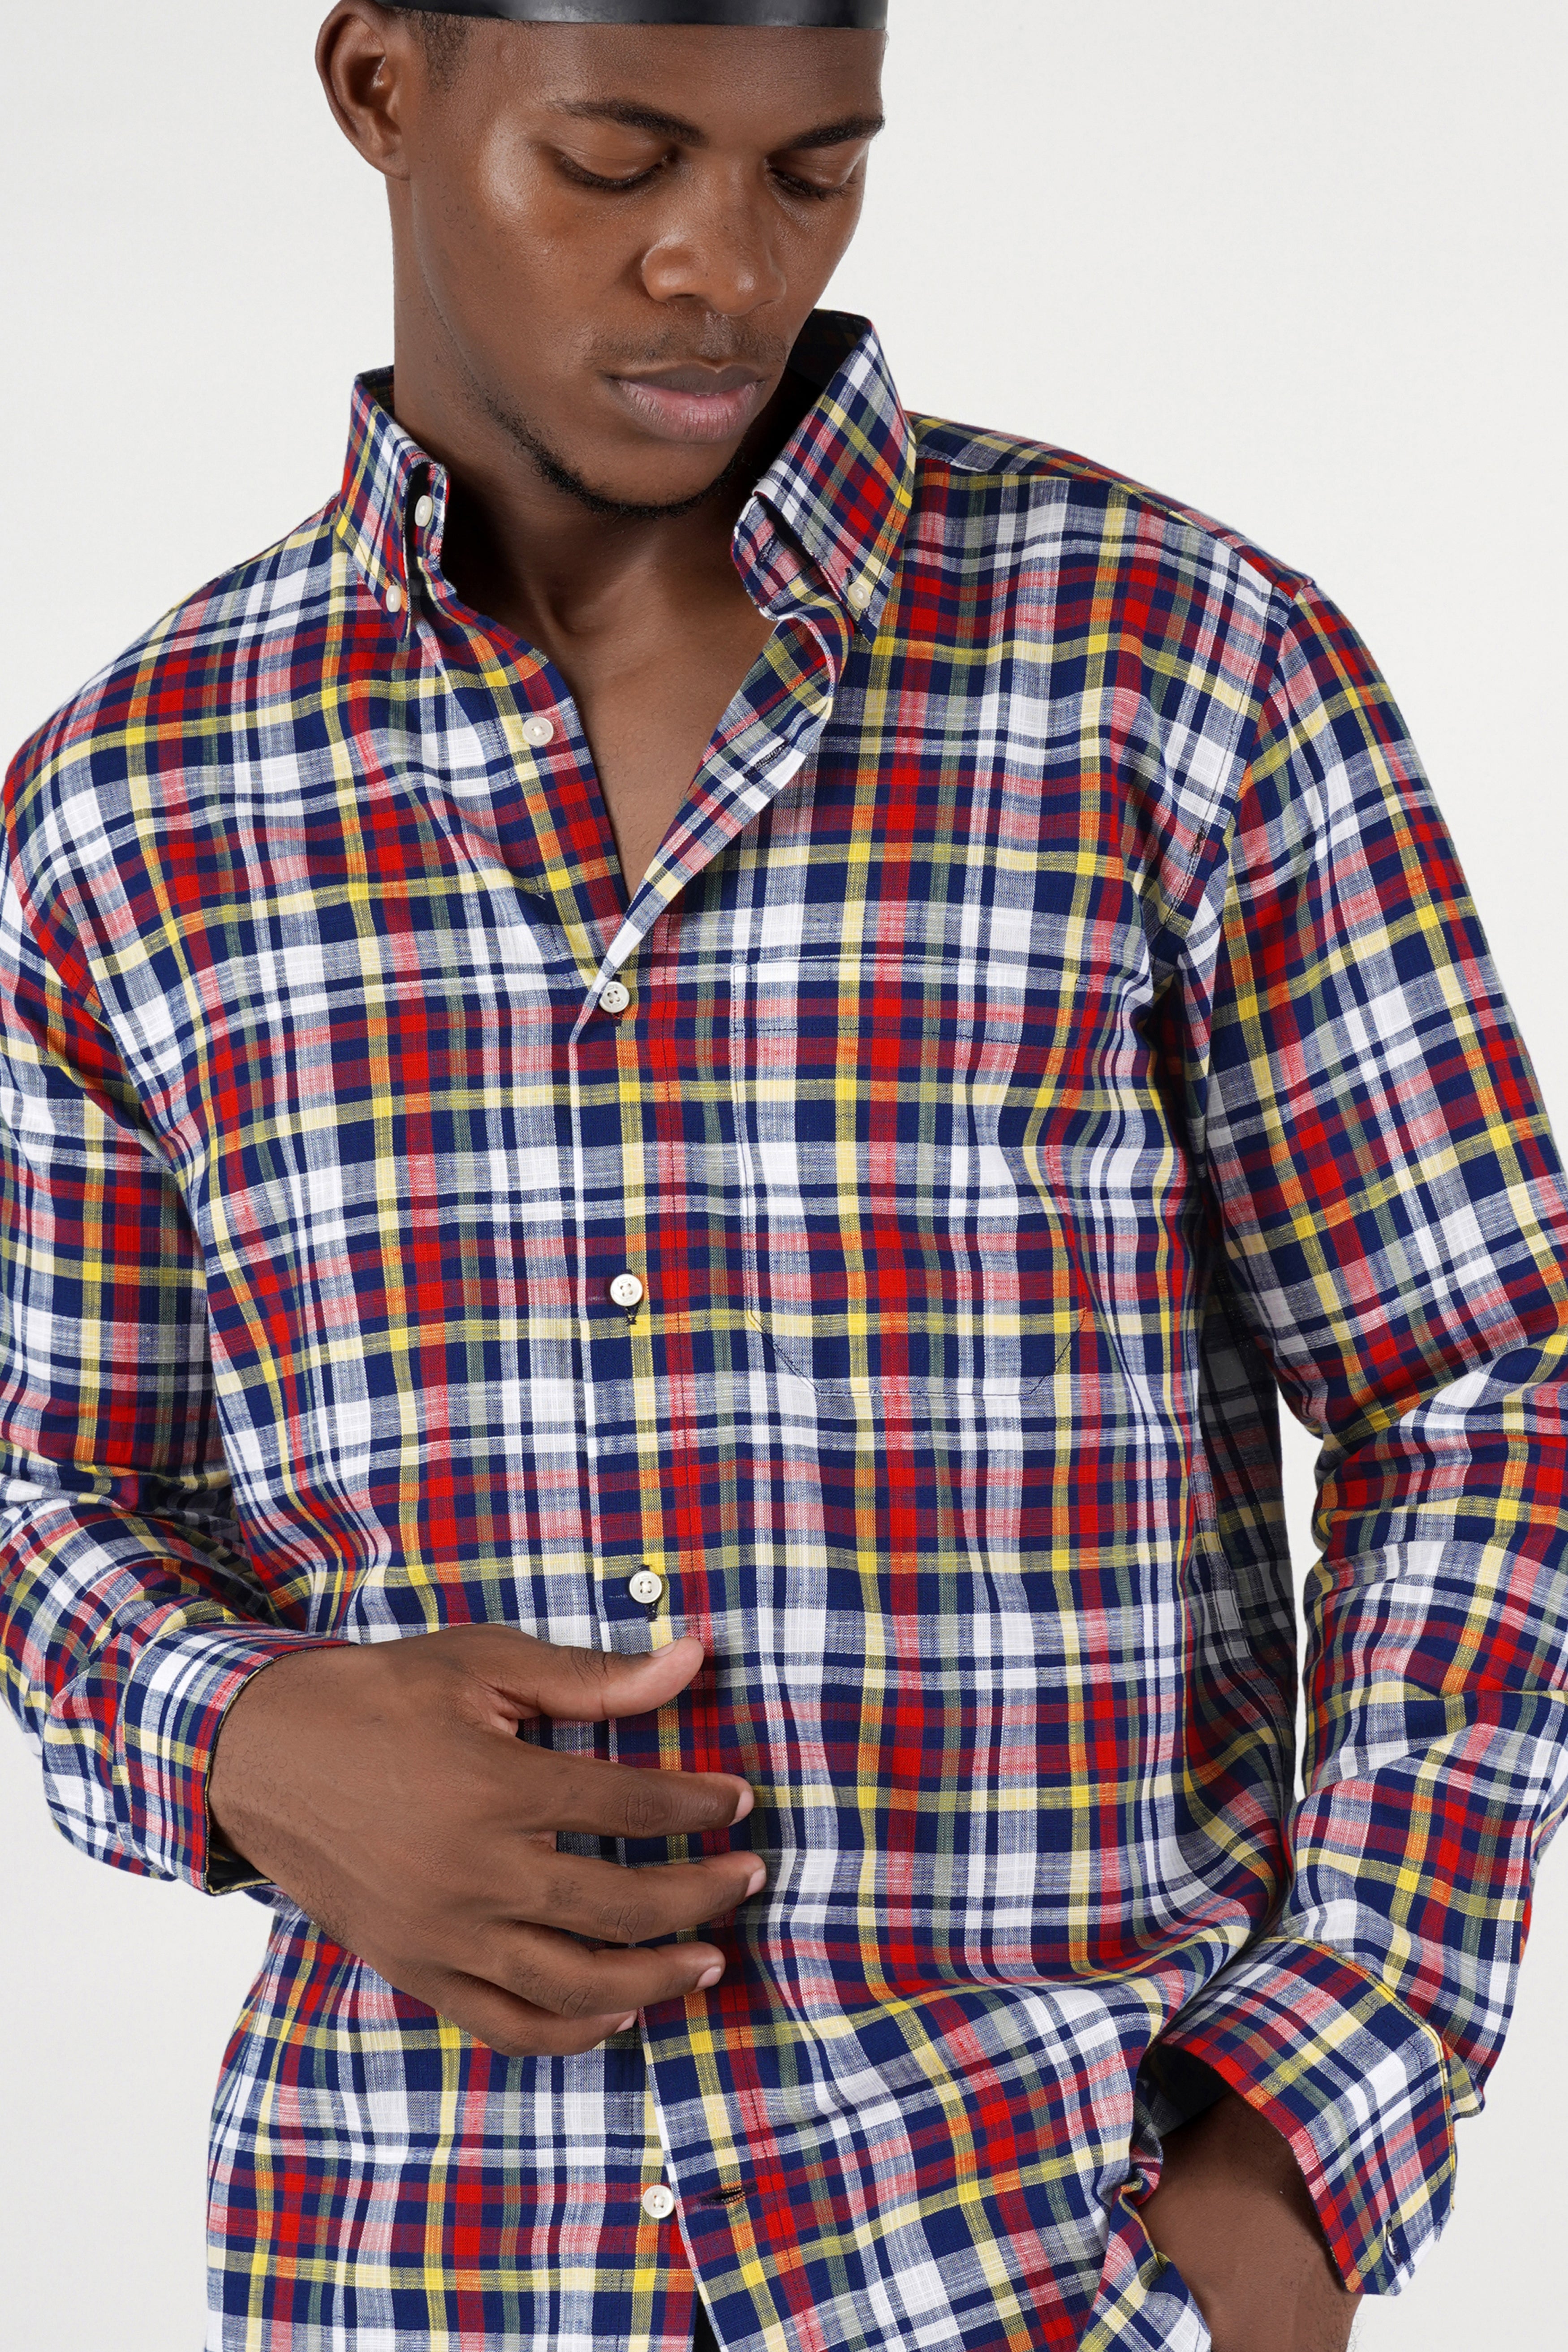 Bright White with Deep Cove Blue and Cornell Red Checkered Luxurious Linen Shirt